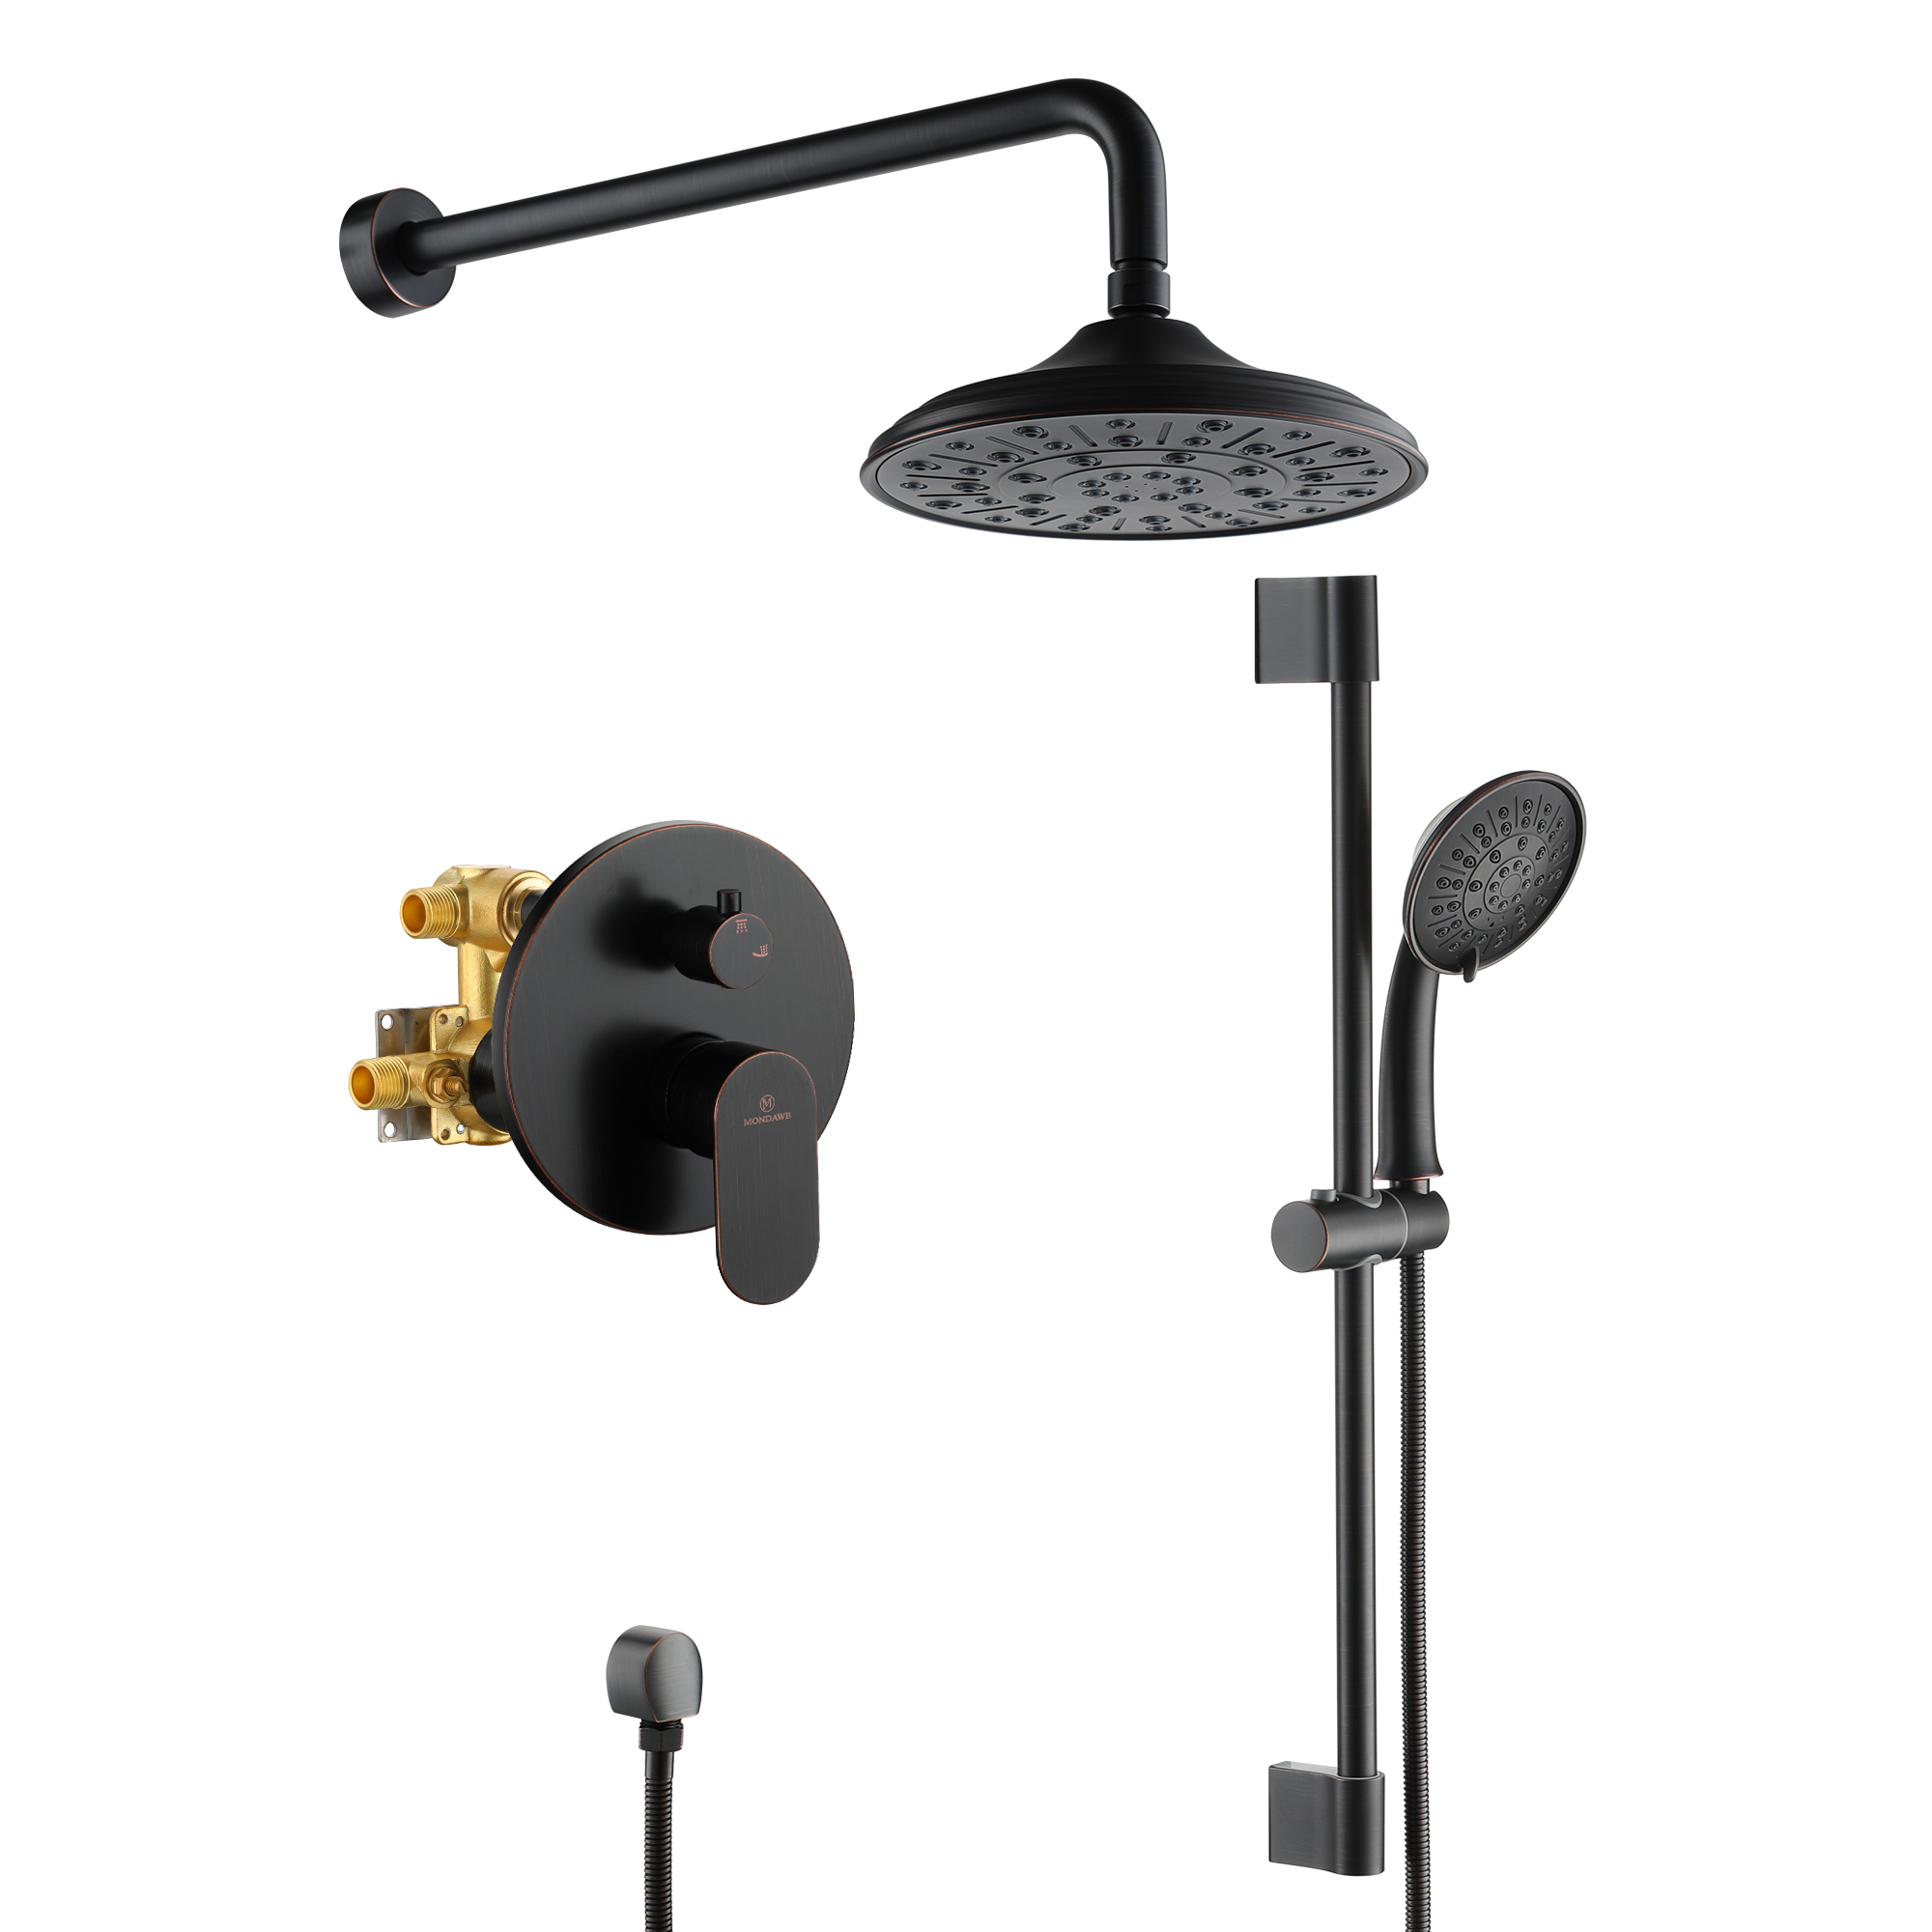 9815-ORBMondawe Retro Series 2-Spray Patterns with 1.8 GPM 8 in. Rain Wall Mount Dual Shower Heads with Handheld and Spout in Brushed Nickel/ Black/ Bronze/Brushed Gold-Mondawe